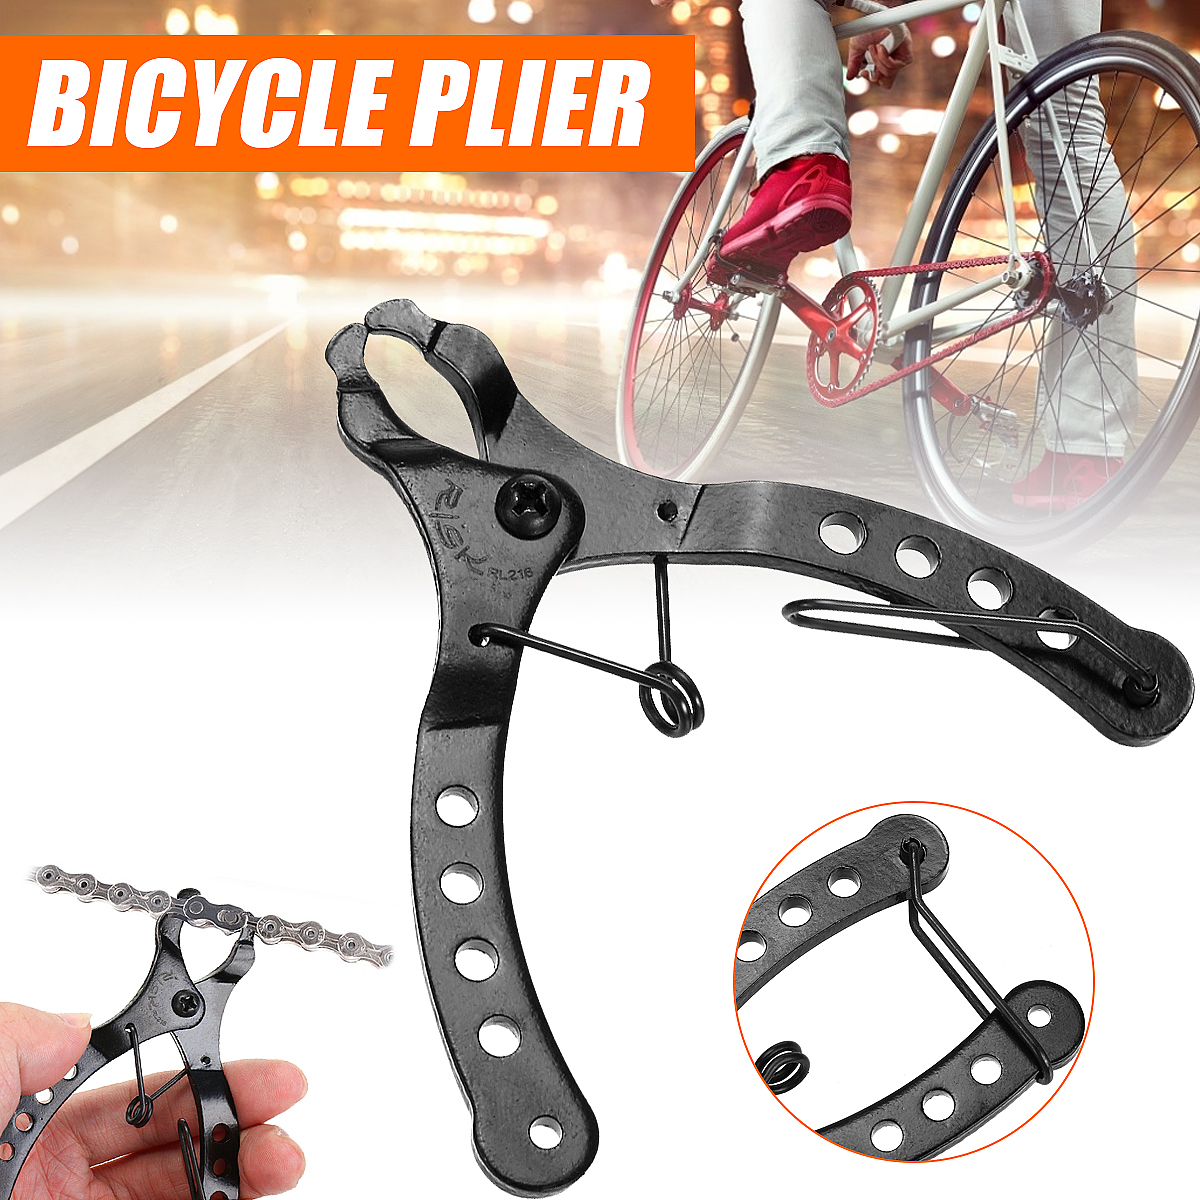 Mini-Chain-Quick-Link-Tool-Bicycle-Plier-Mountain-Bike-Chains-Clamp-Buckle-1749898-1